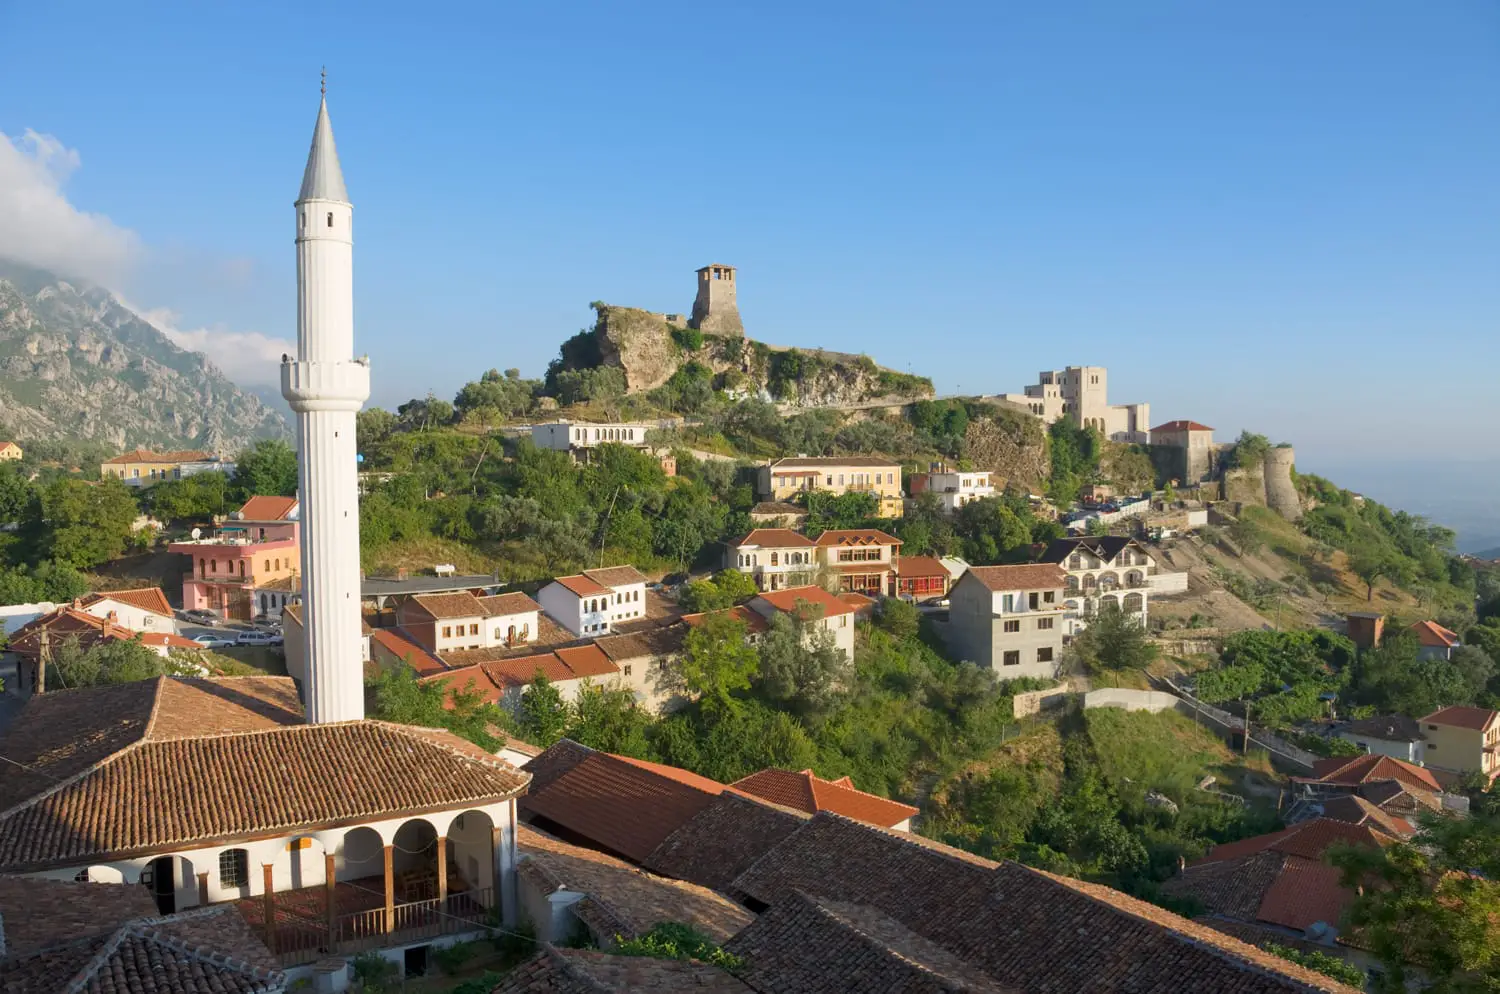 view of the minaret of the Kruja village and the Clock Tower and National Museum in Skanderbeg Castle, Albania